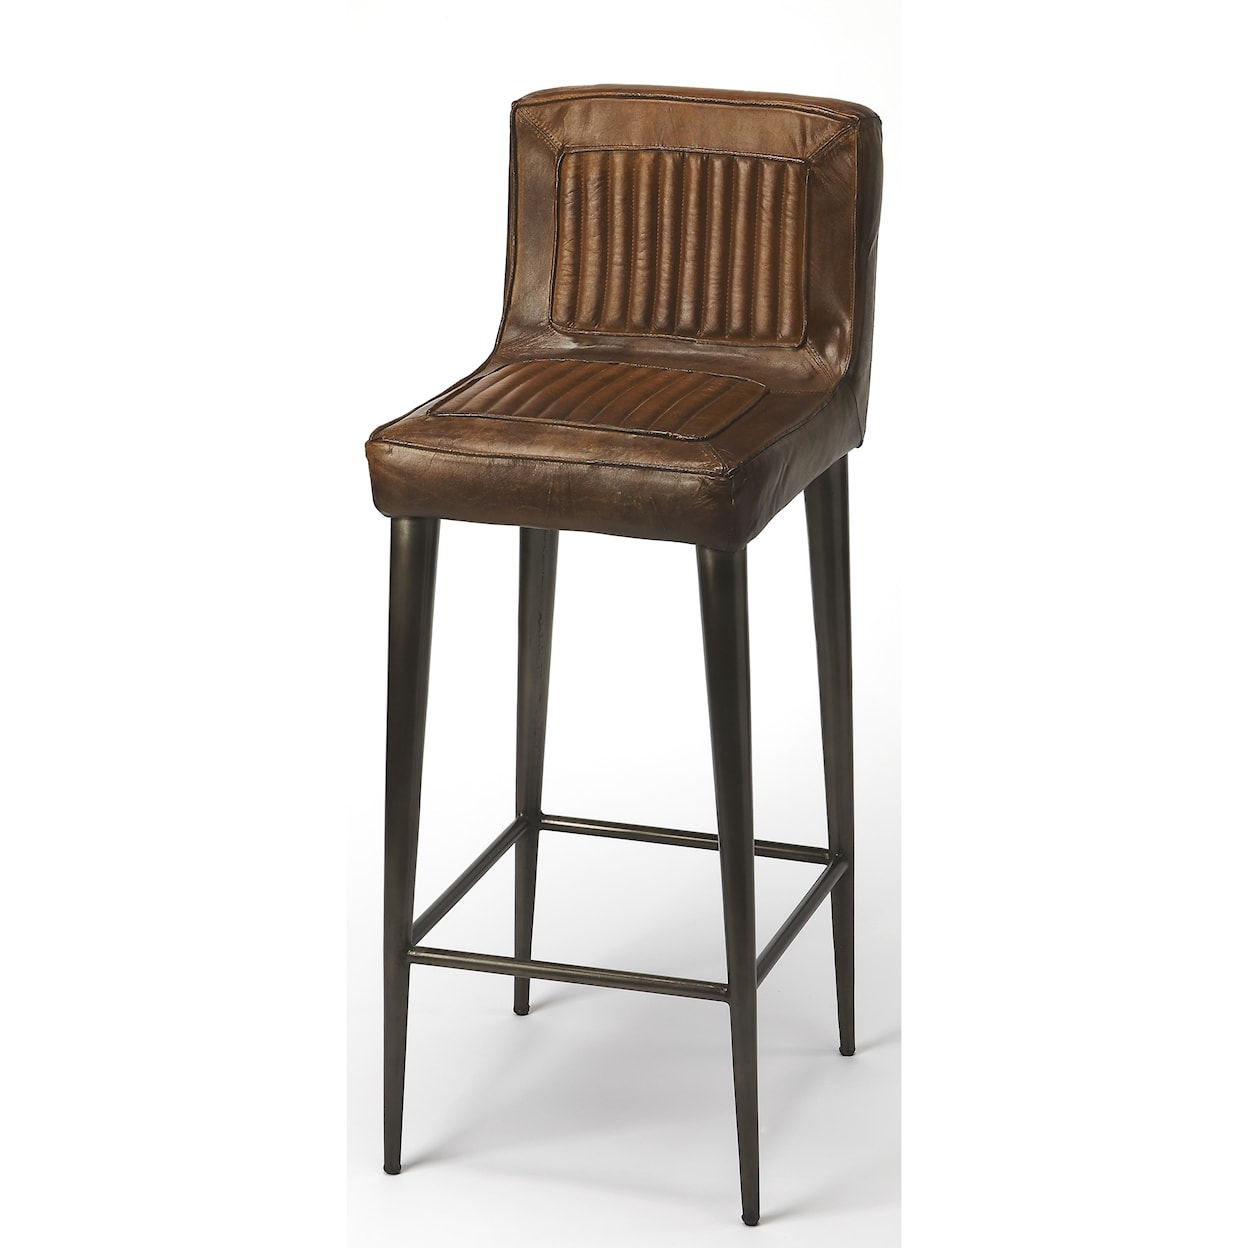 Butler Specialty Company Industrial Chic Bar Stool